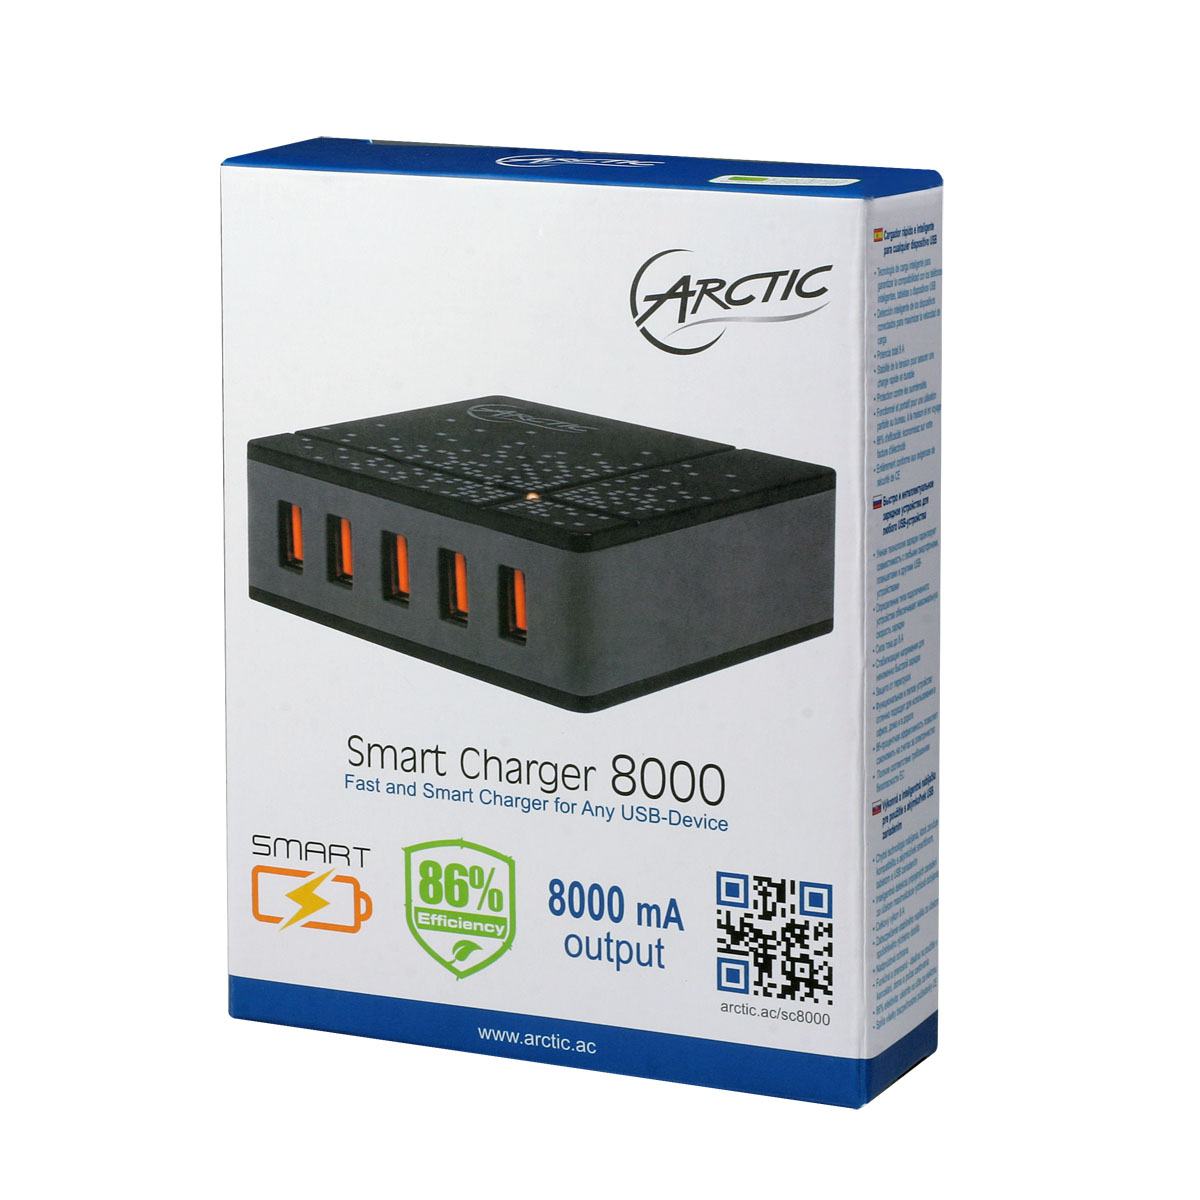 Smart_charger_8000_US_G06